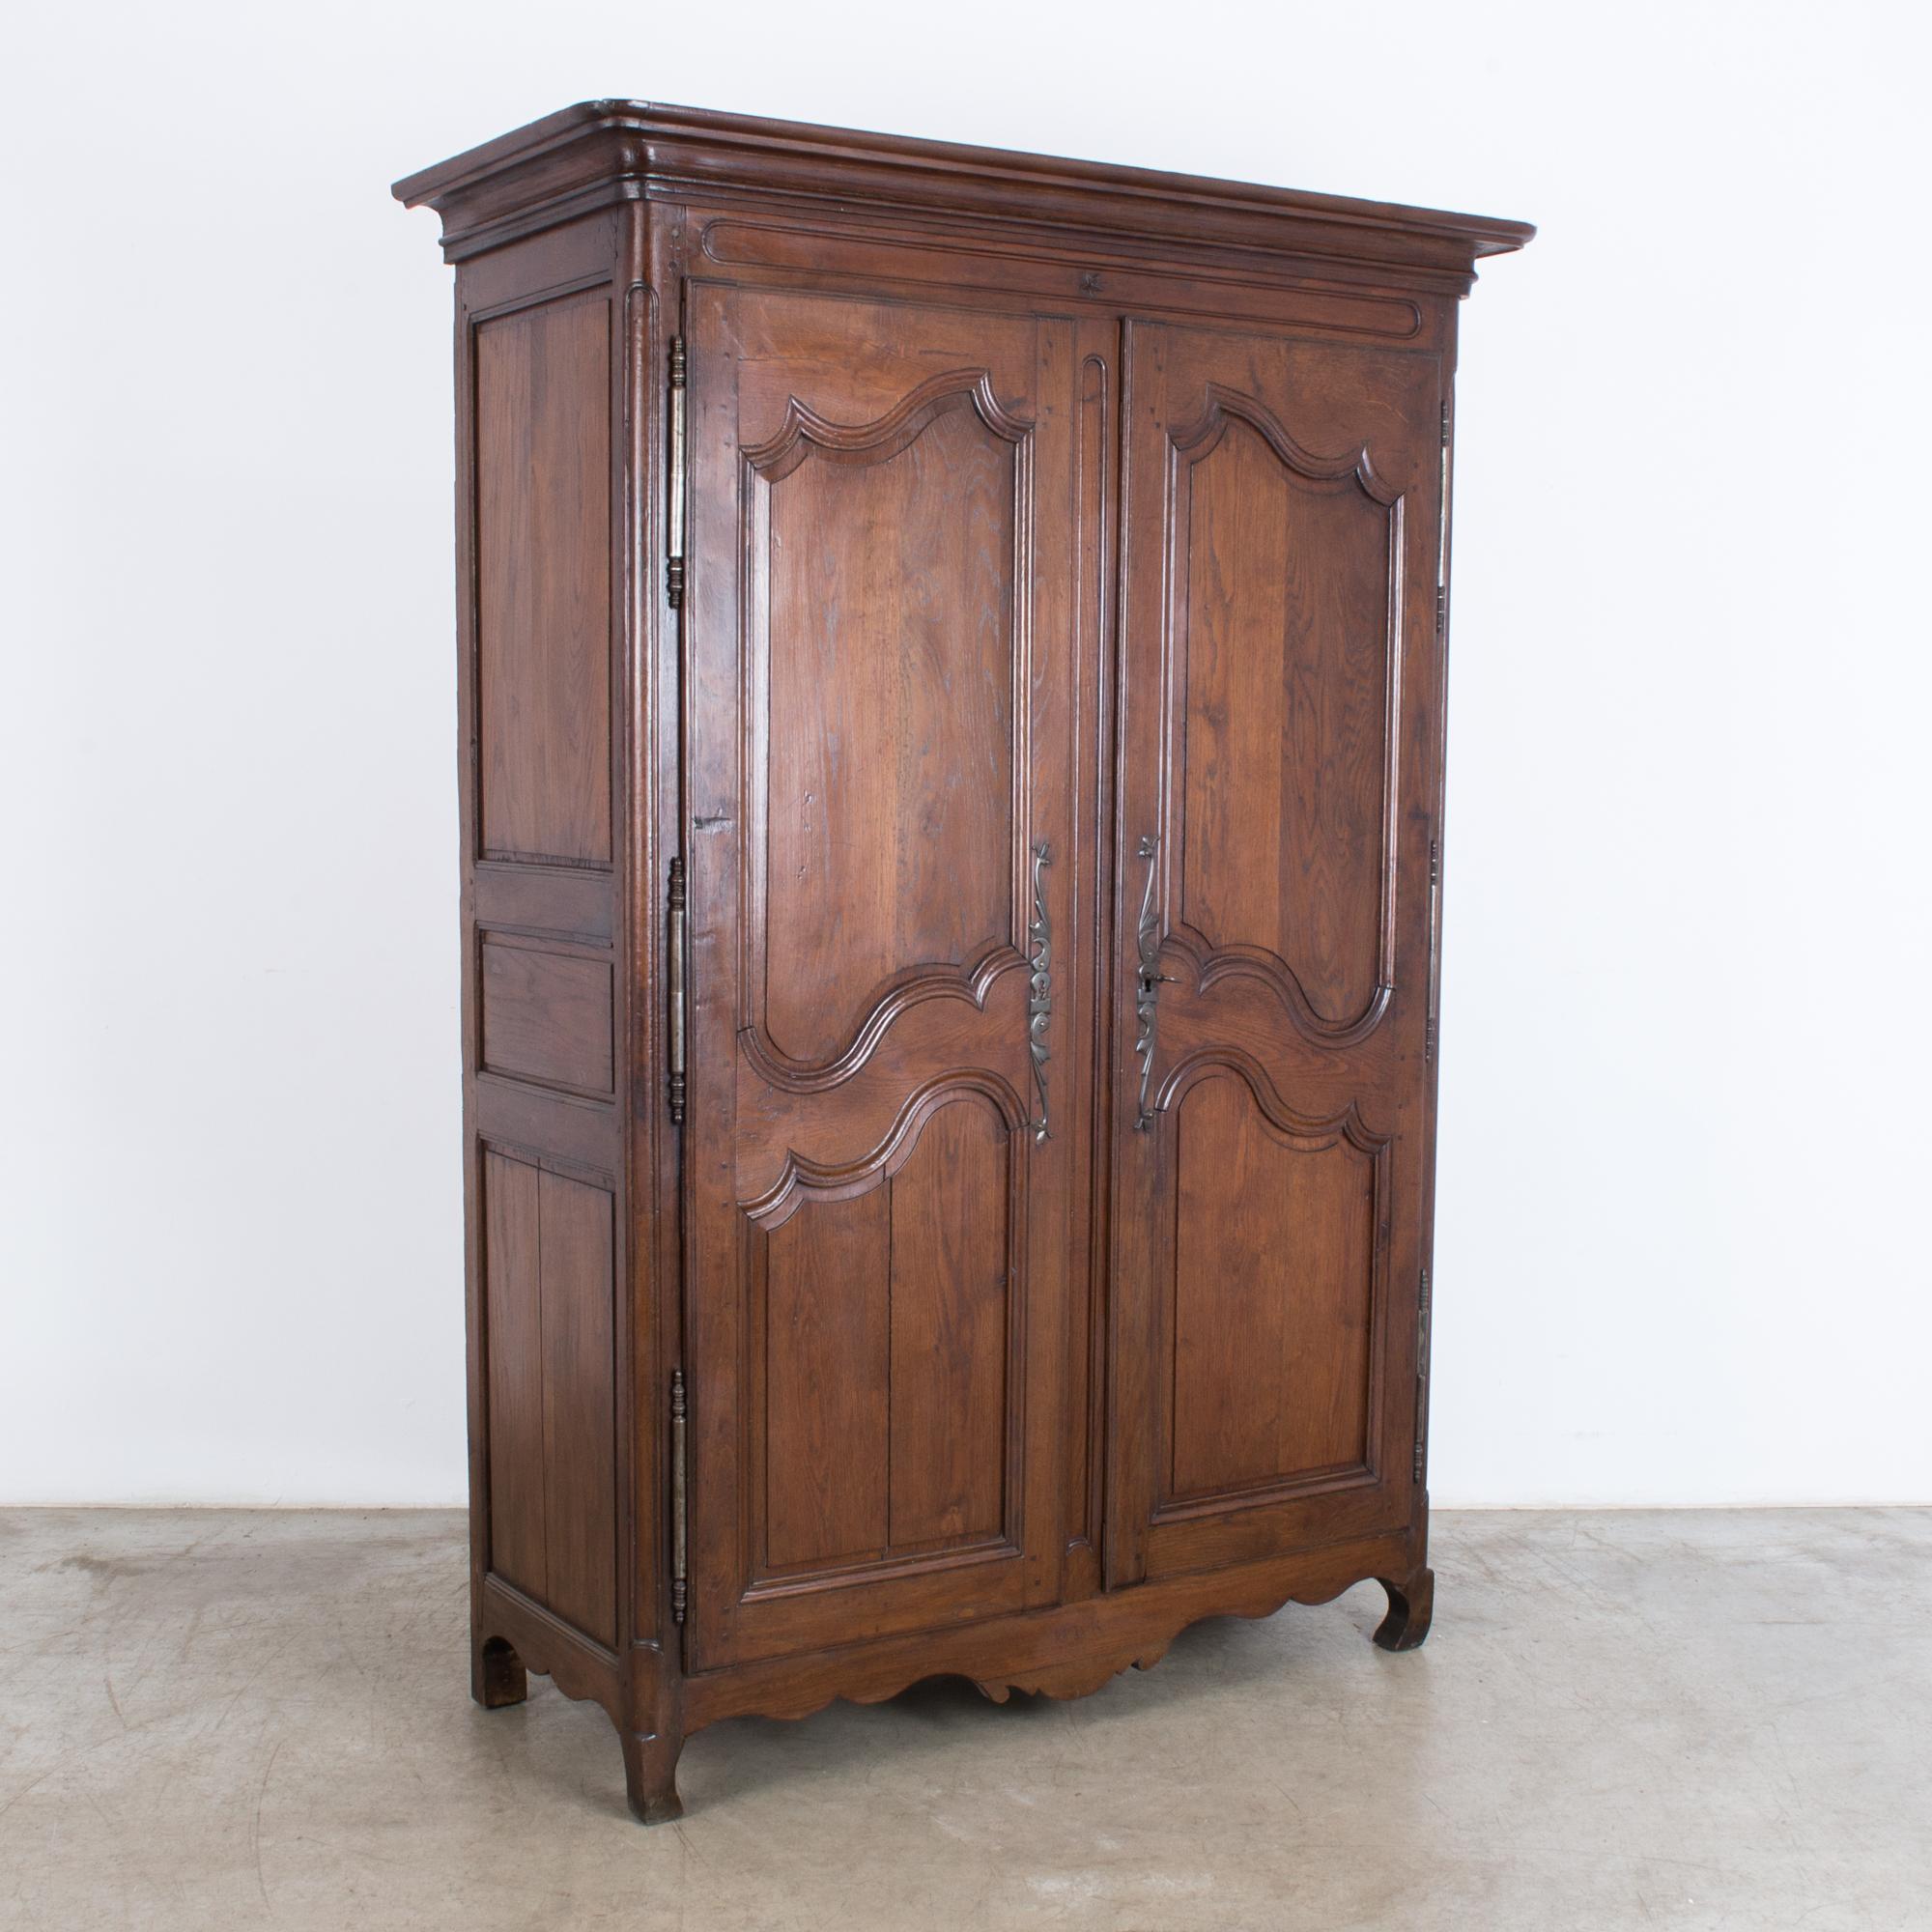 French Turn of the Century Wooden Armoire with Original Patina